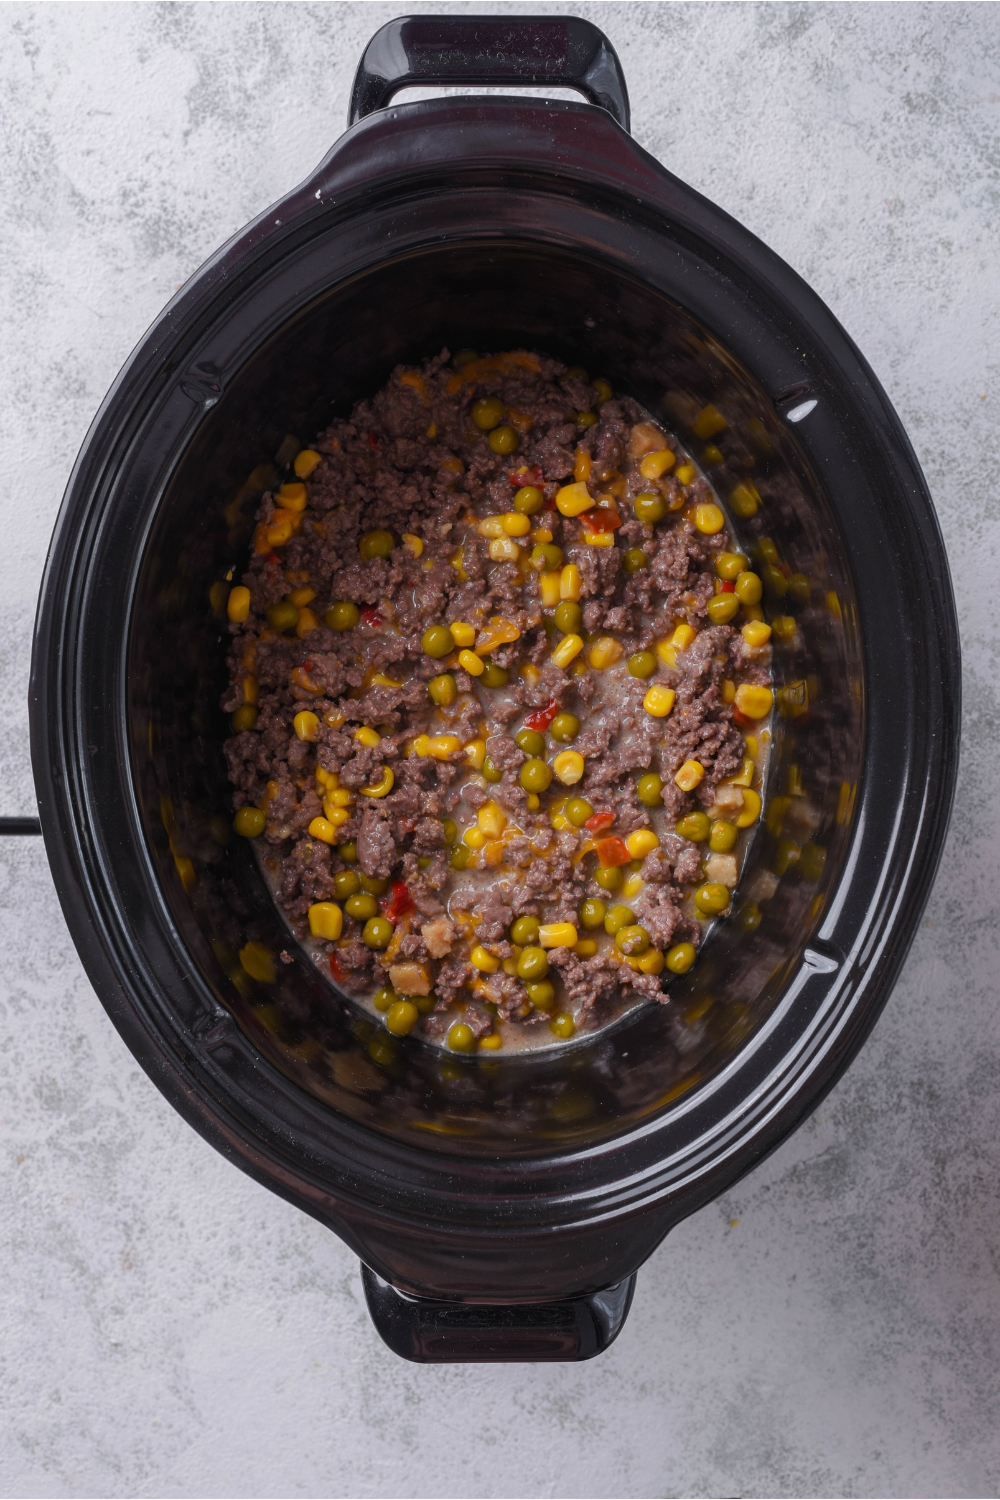 A slow cooker with an even layer of ground beef, corn, peas, and diced peppers.